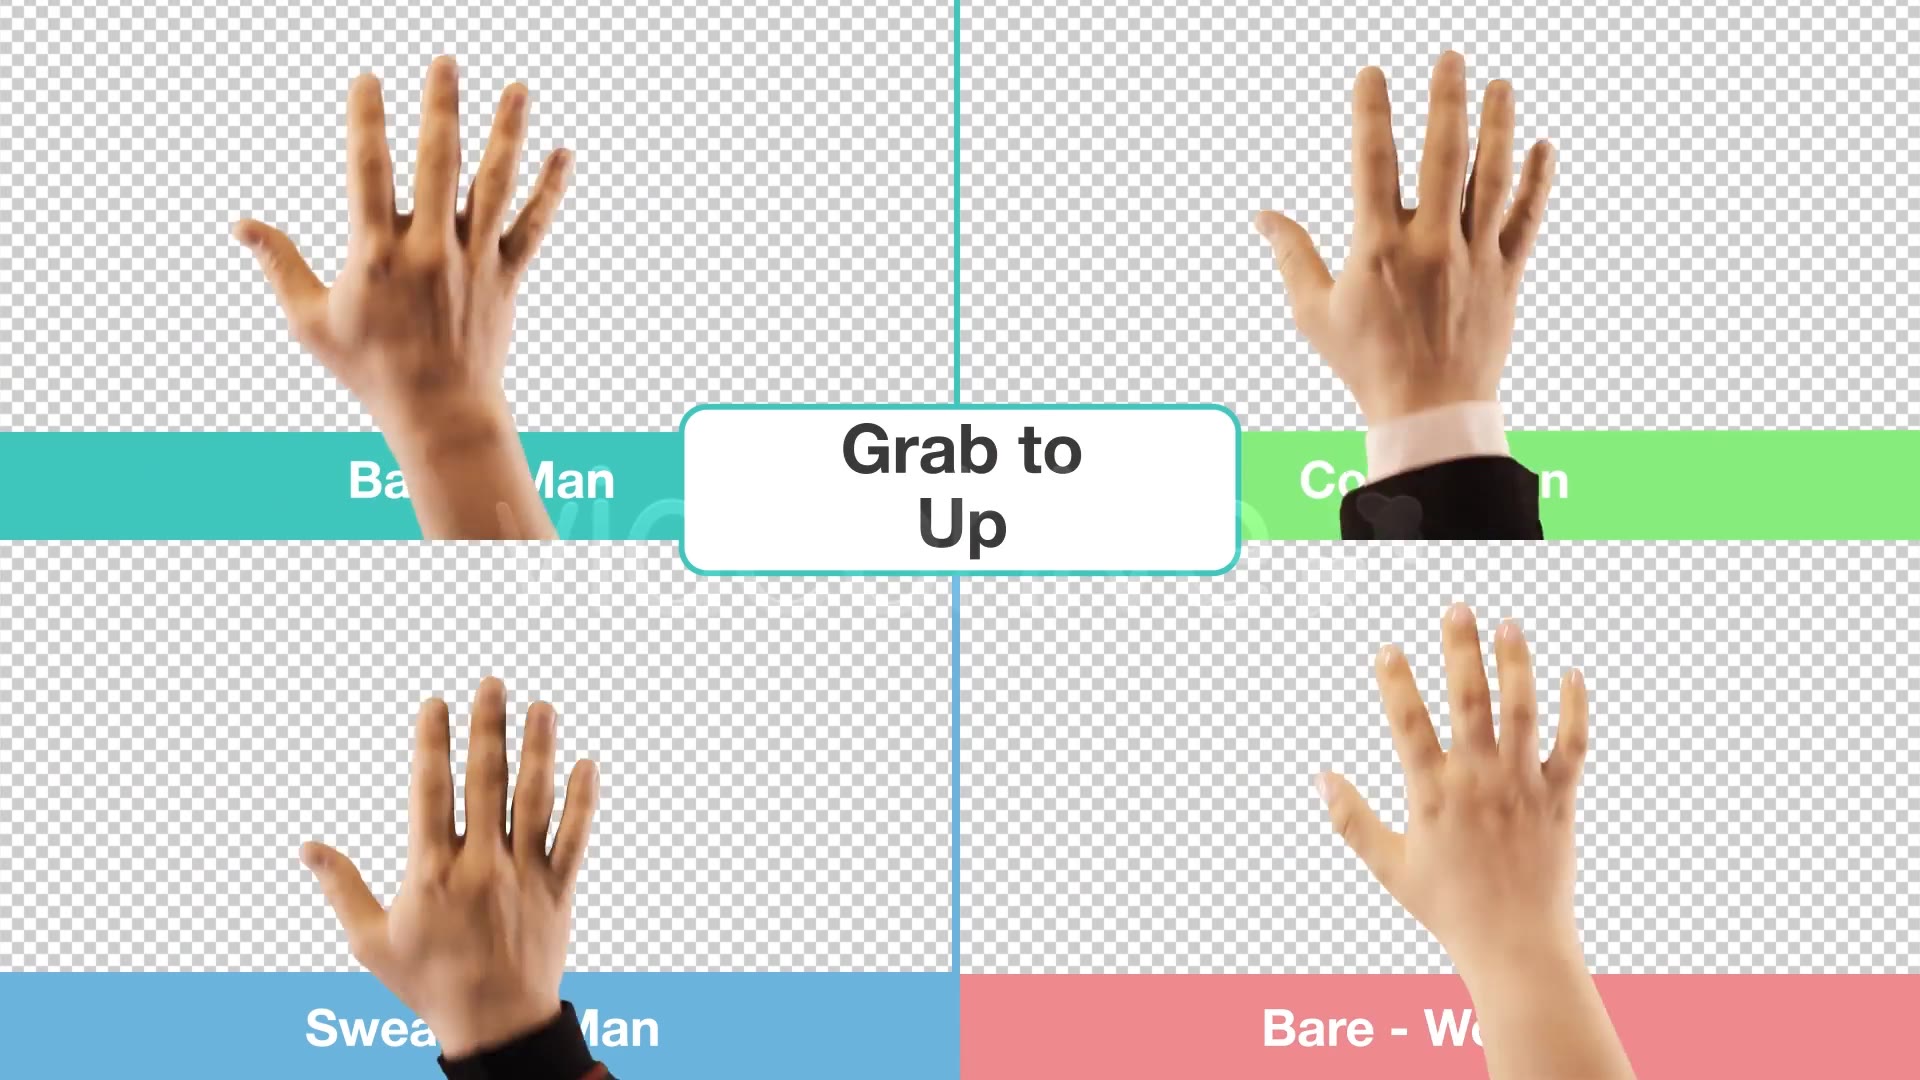 Hand Touch Gestures  Videohive 11736571 Stock Footage Image 6